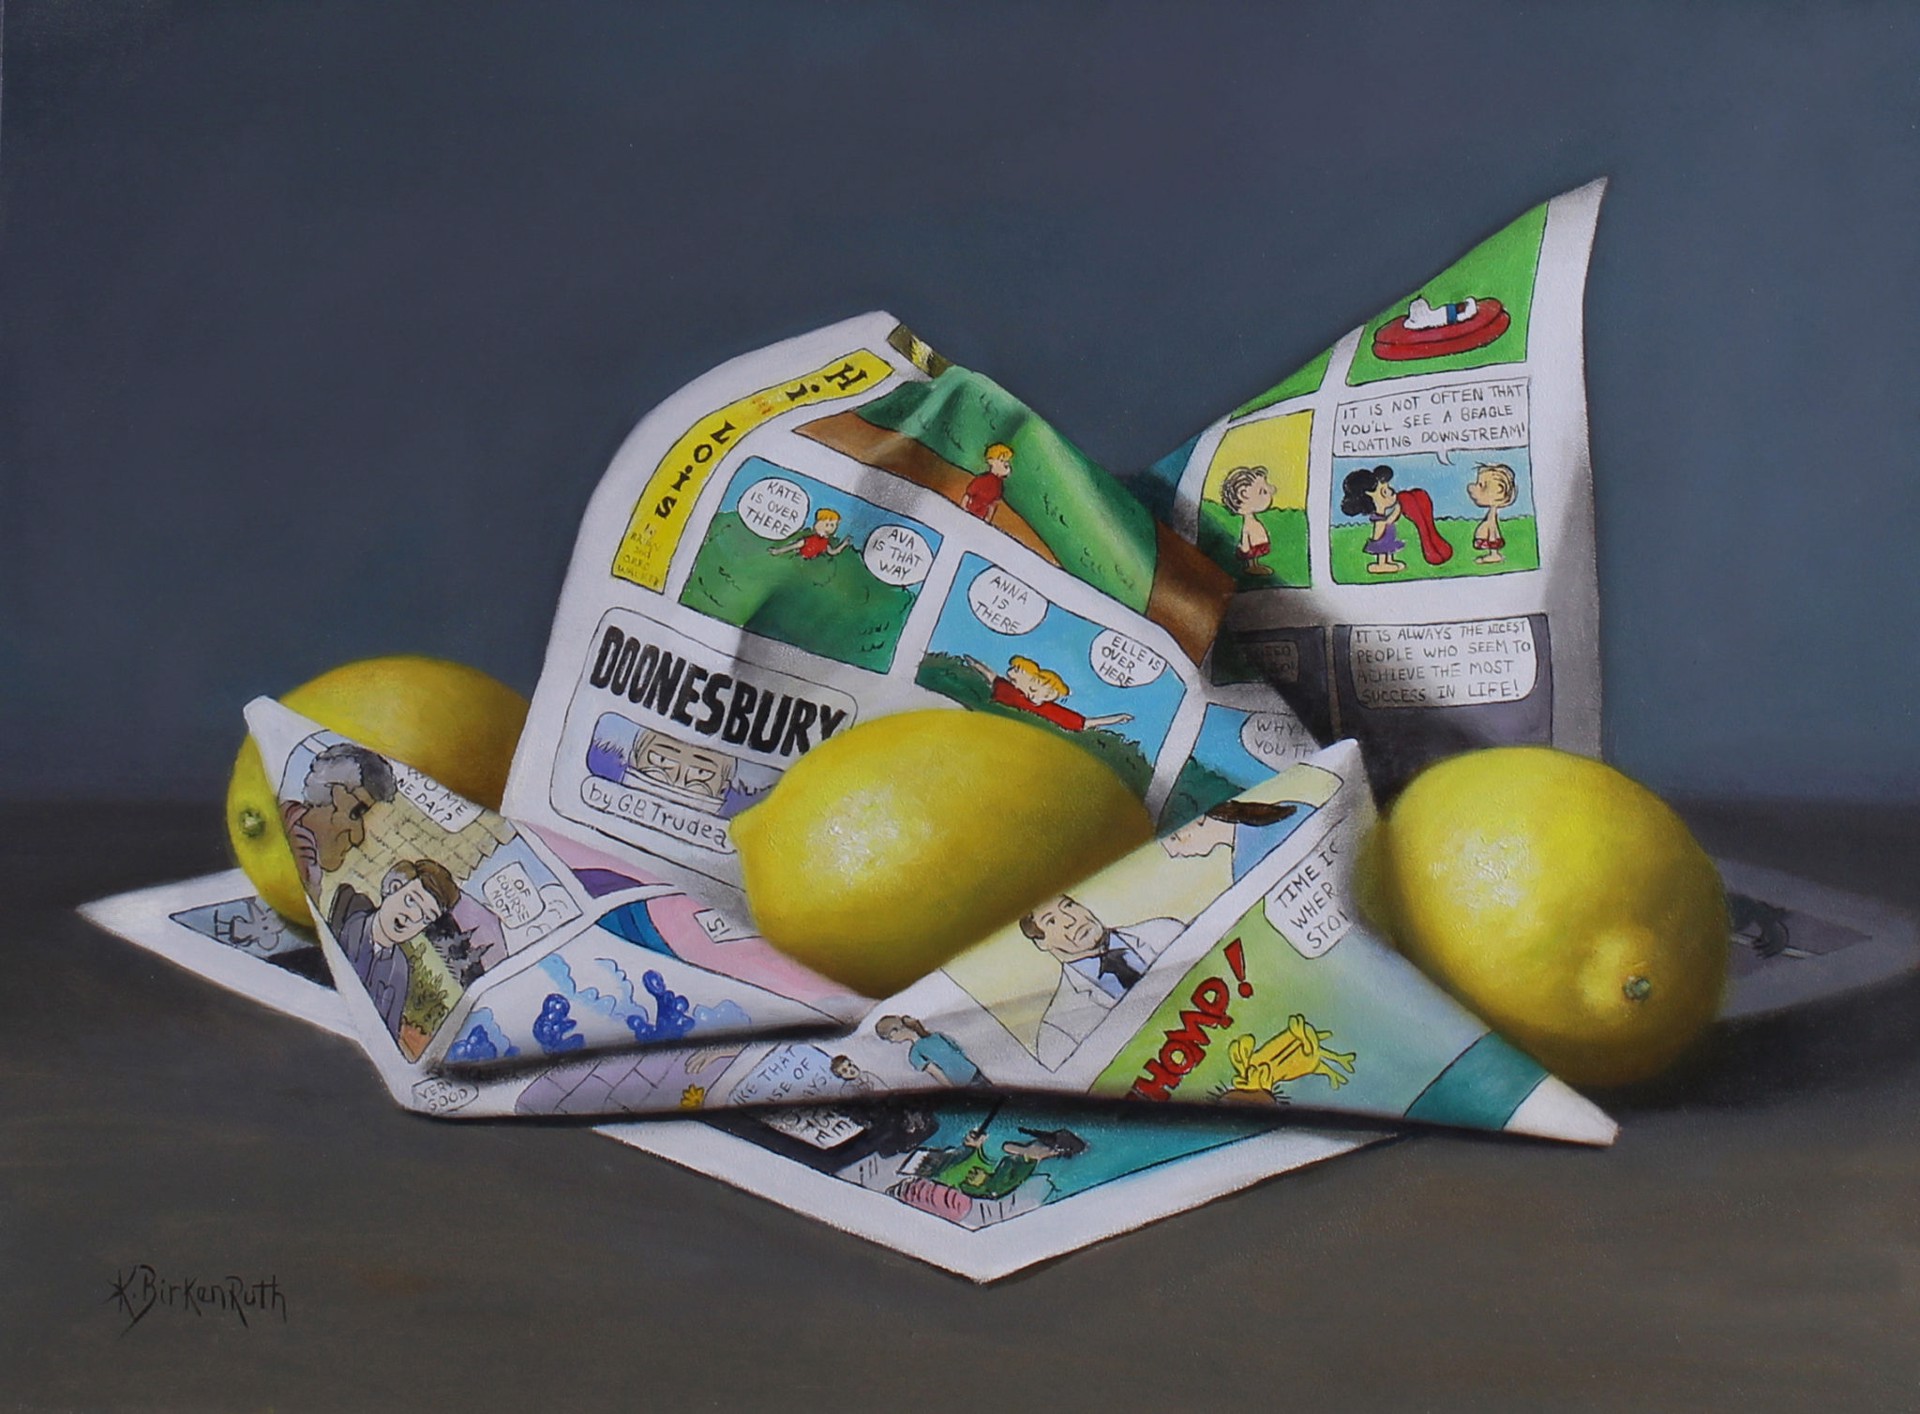 Laughs with a Squeeze of Lemon by Kelly Birkenruth